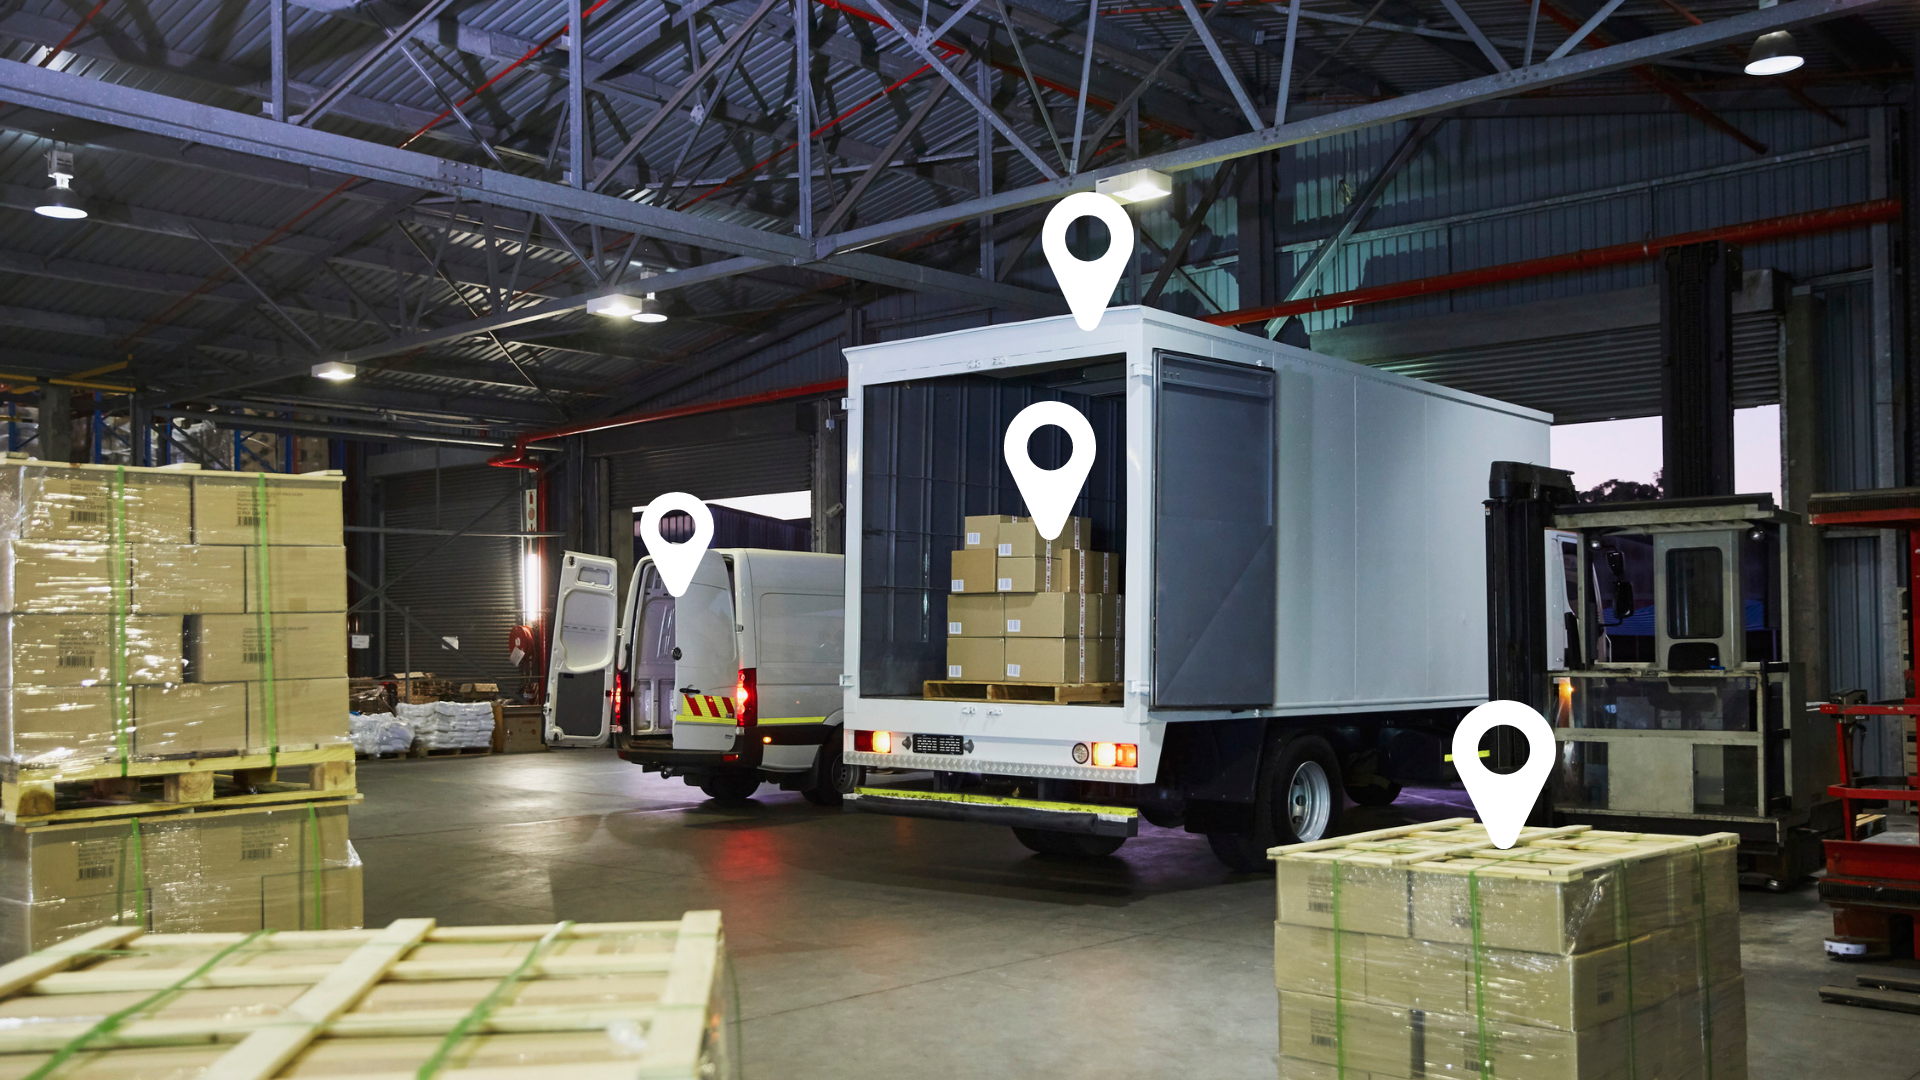 Asset tracking systems are expected to be used by 114 million businesses globally in 2025